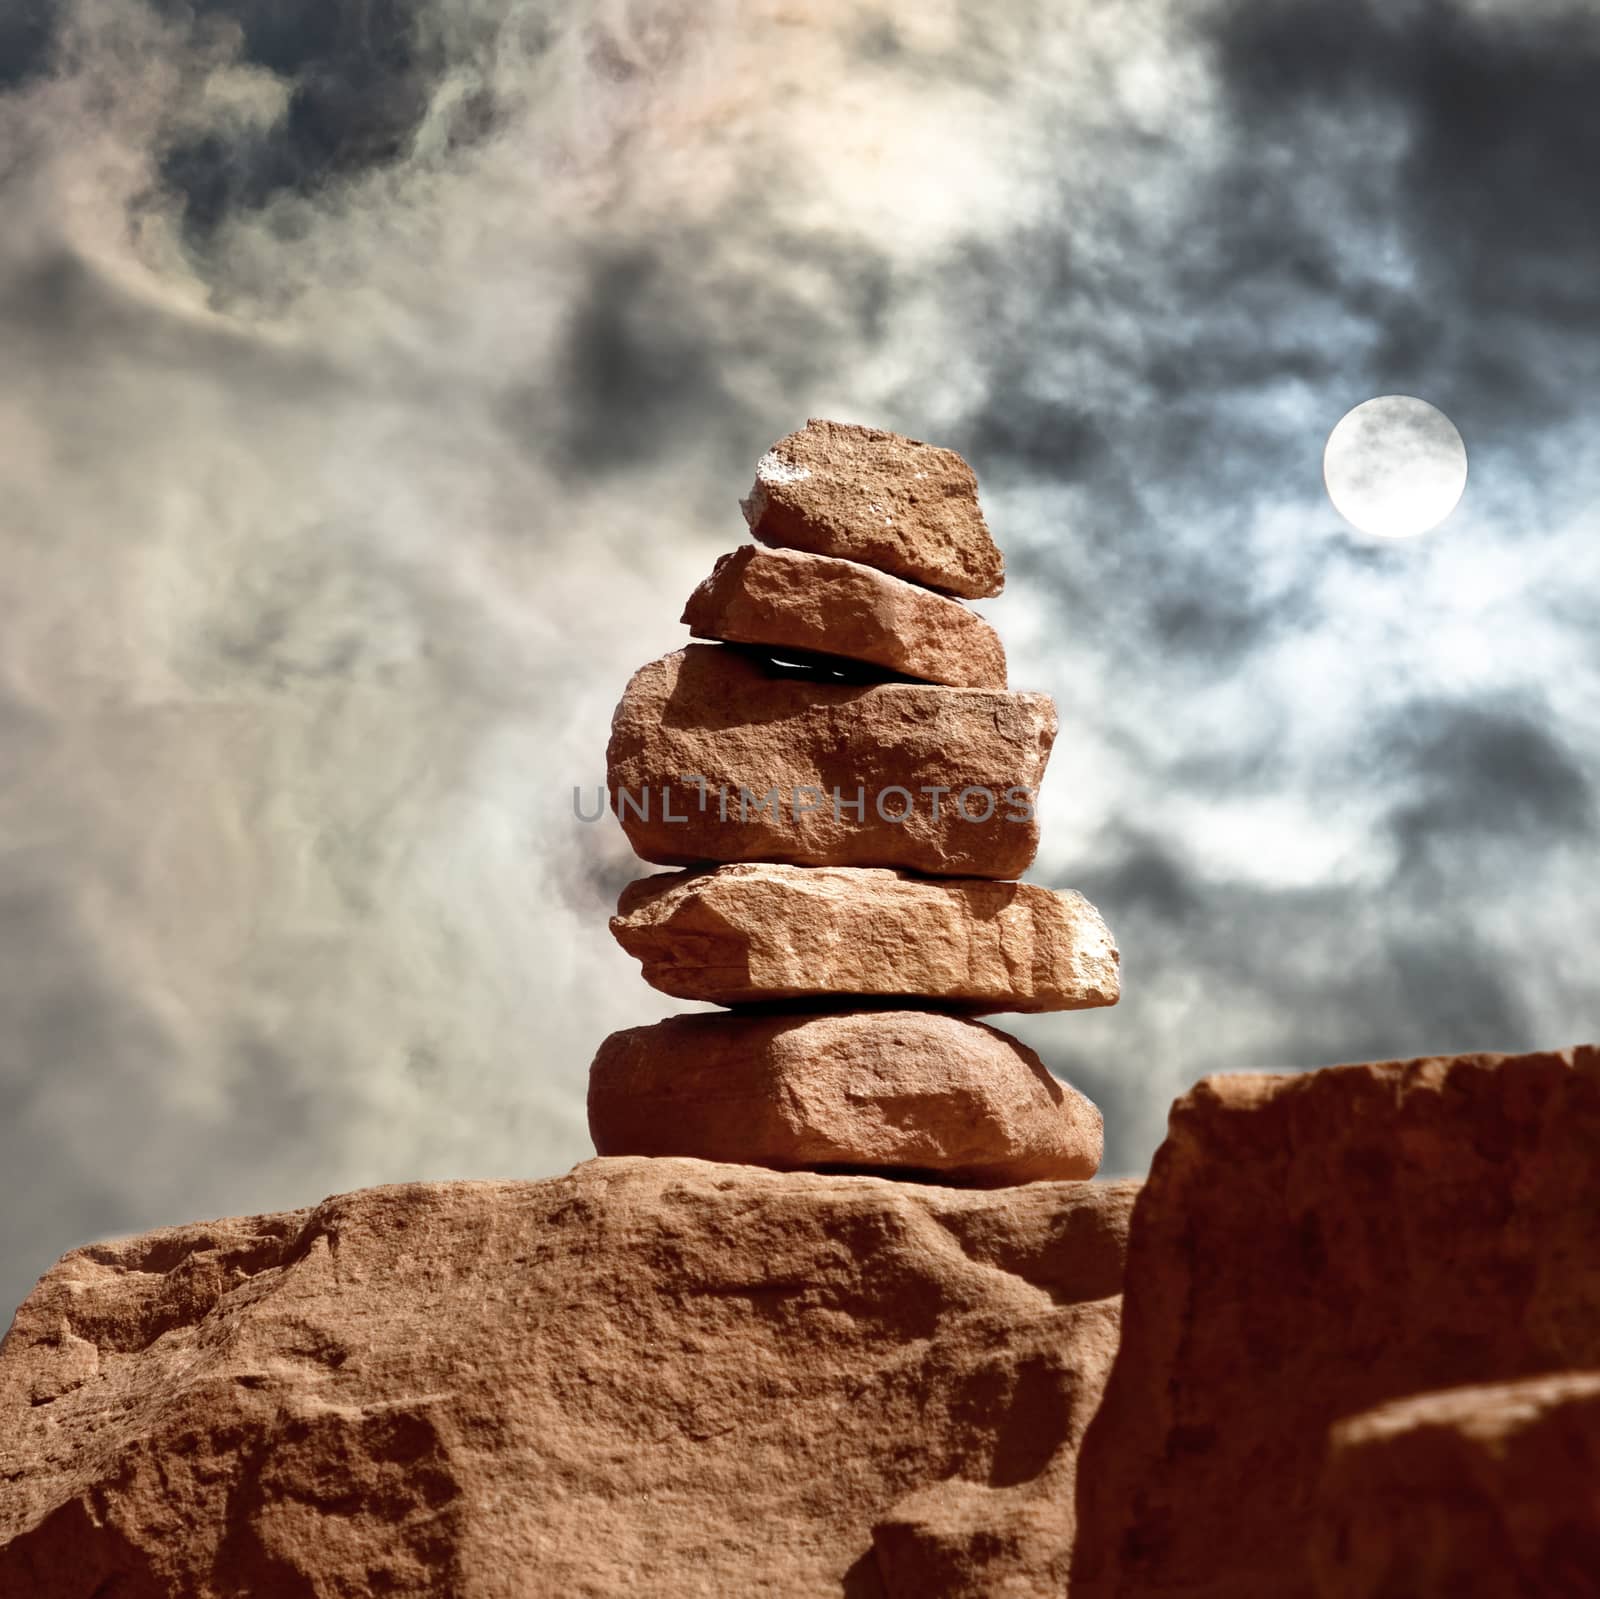 Signposts made of piled stones in Wadi Rum, with a frightening sky in the background by geogif